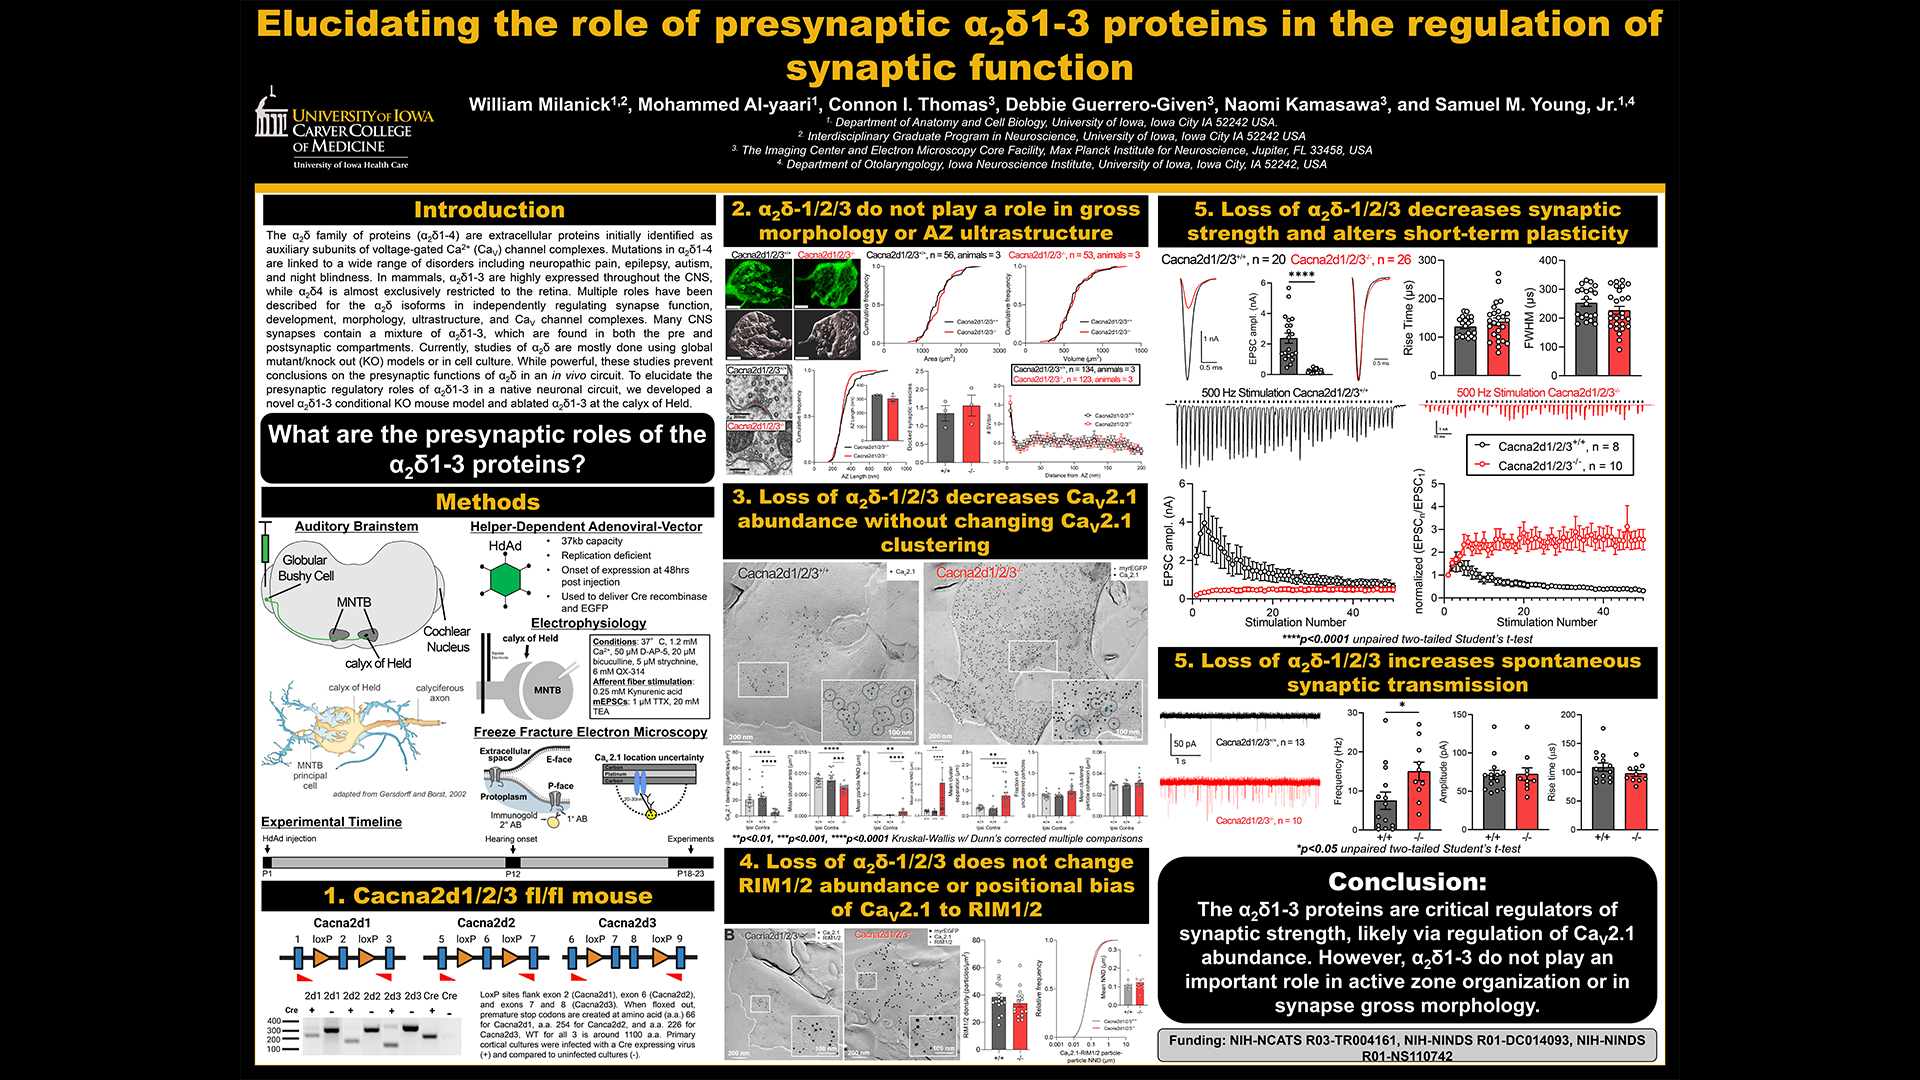 Milanick: Elucidating the role of presynaptic a2o1-3 proteins in the regulation of synaptic function